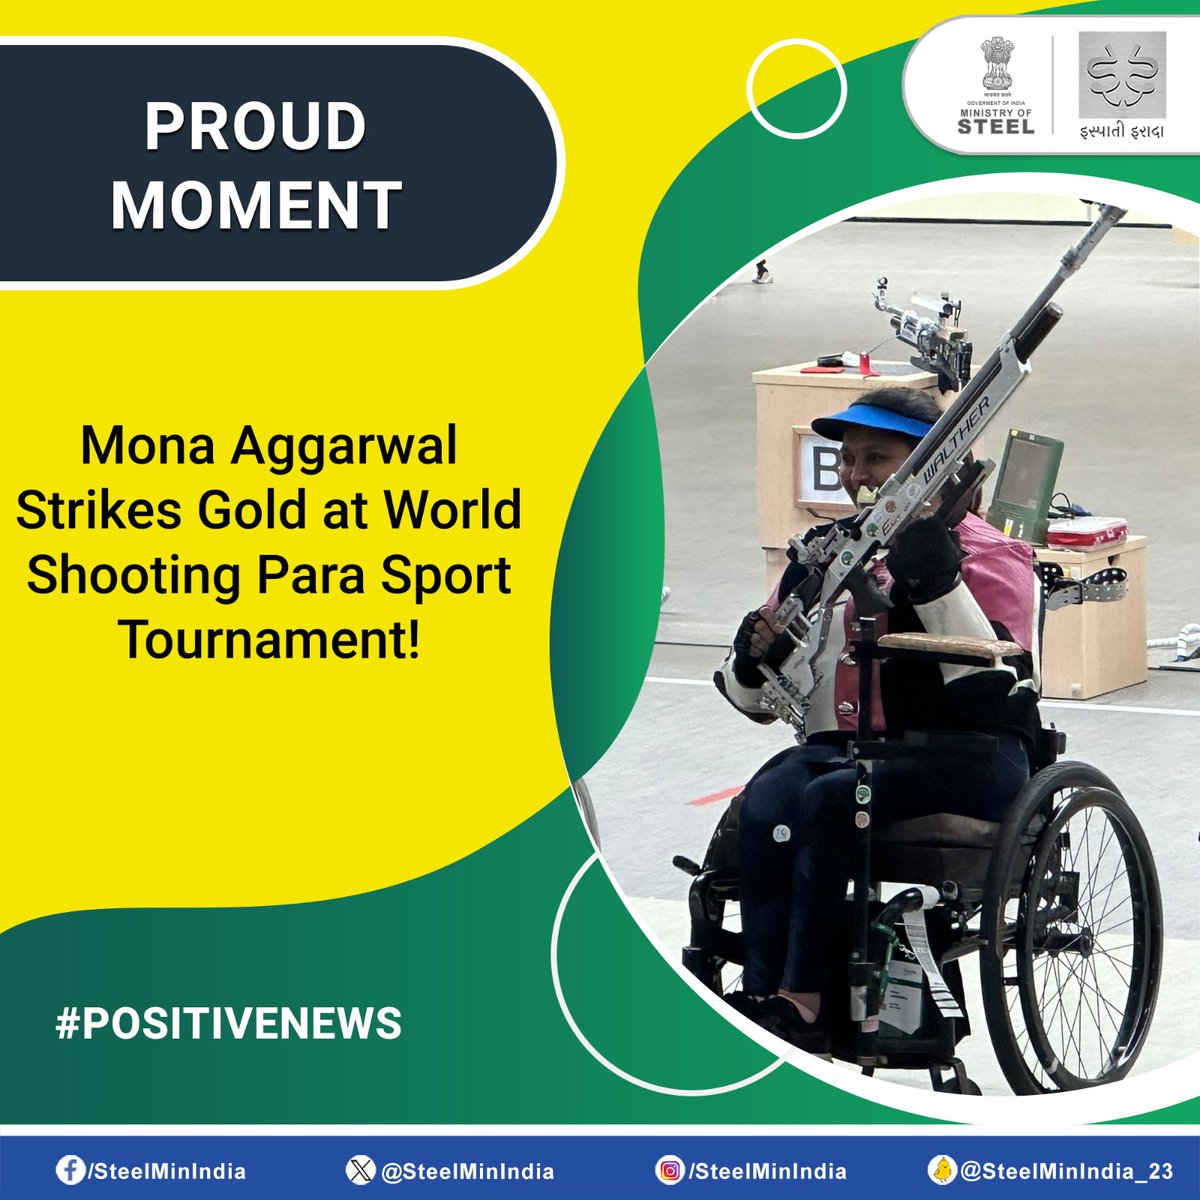 Indian para-shooter #MonaAggarwal clinched #Gold🥇 in the Women’s 10m Air Rifle Event at the World Shooting Para-Sport Tournament in Changwon, Korea! Congratulations on this remarkable achievement! 🇮🇳🎯 #PositiveNews #WorldShootingTournament #WSPS #WorldCup